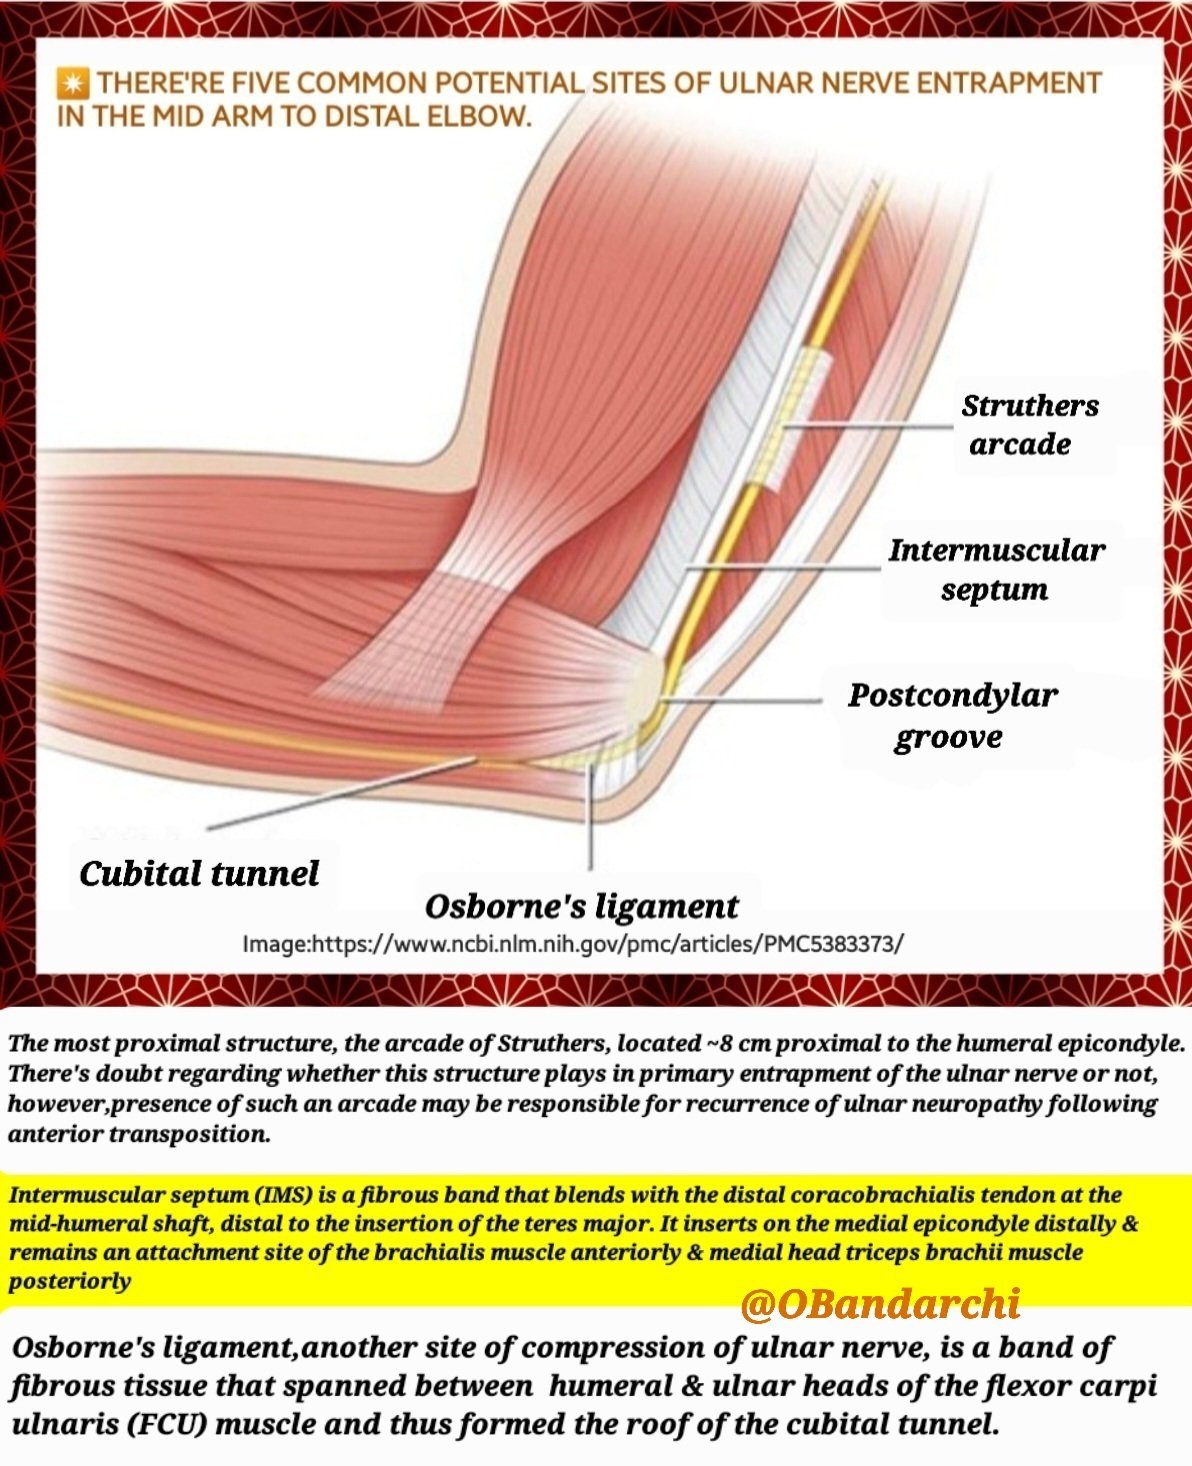 What is Ulnar Nerve Entrapment?